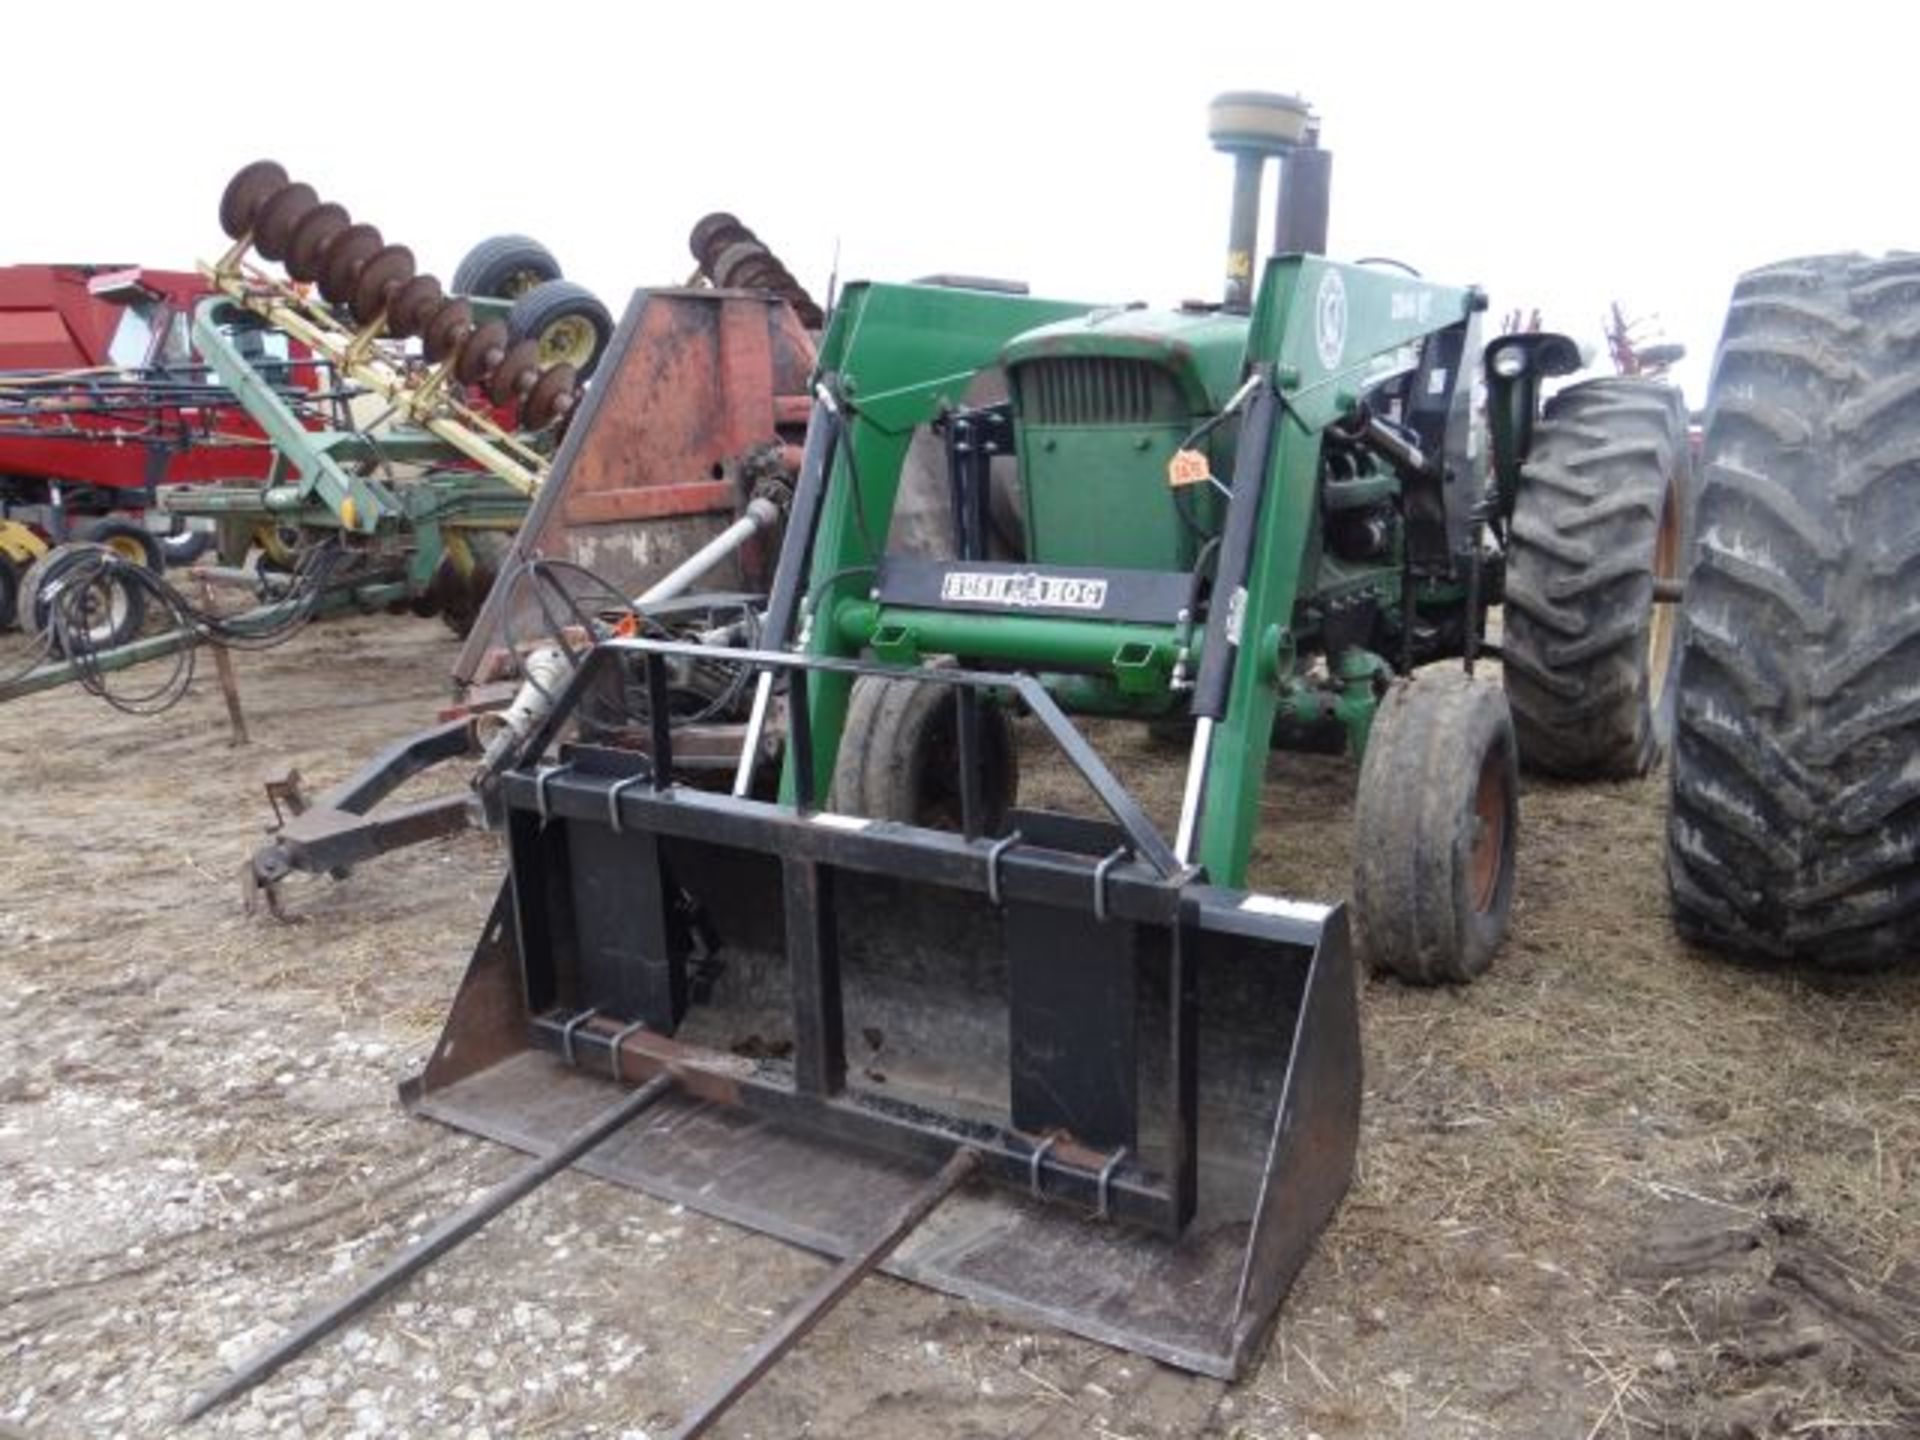 JD 4020 Tractor, 1967 Diesel, Powershift, Hrs are Correct, Trans Overhauled, 300 hrs ago, w/ Bush - Image 4 of 5